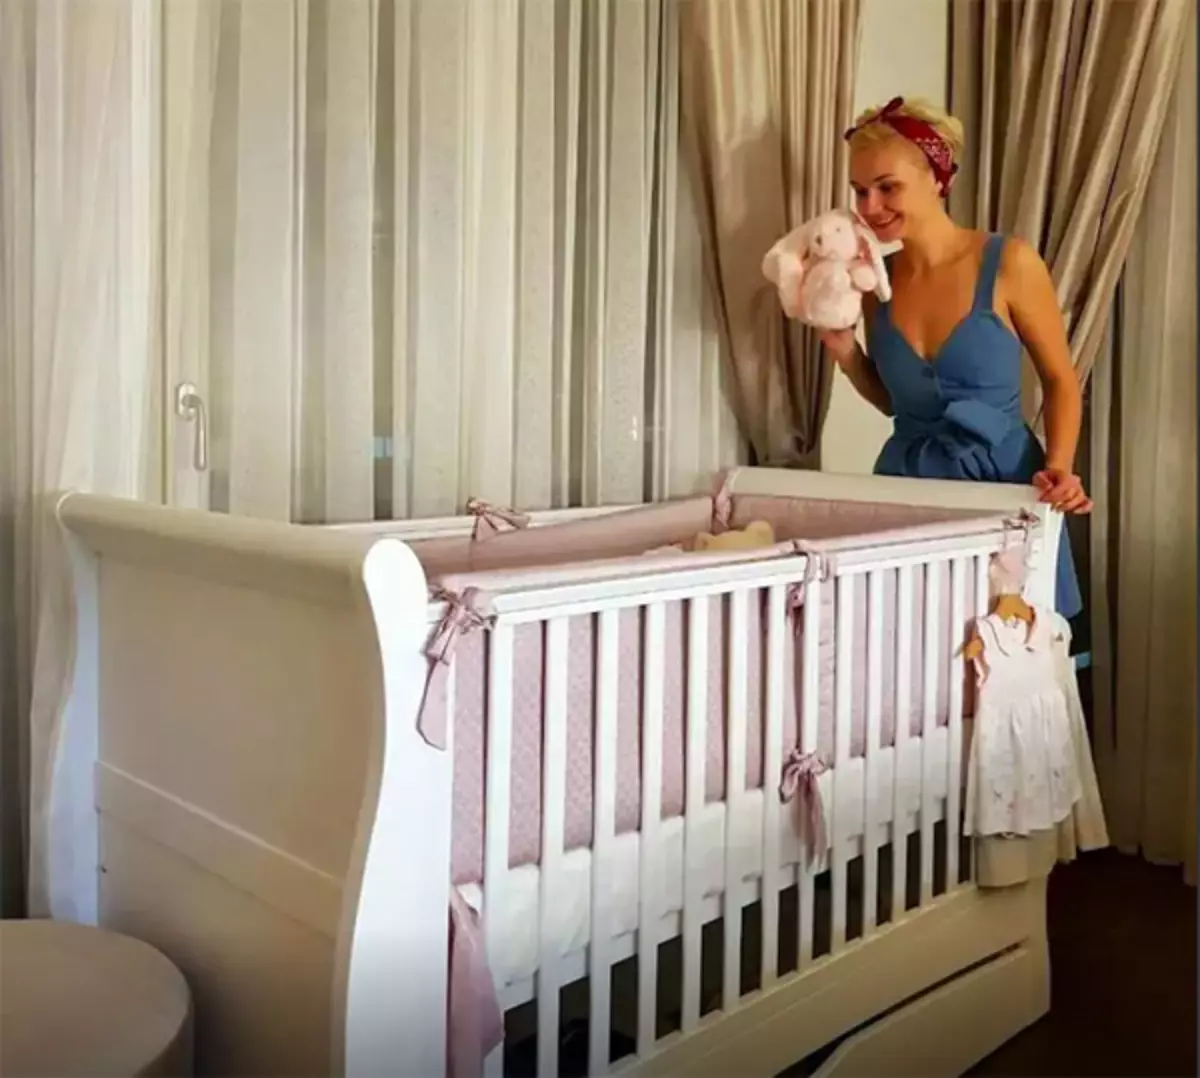 Where Polina Gagarin lives [Star Interior Overview]